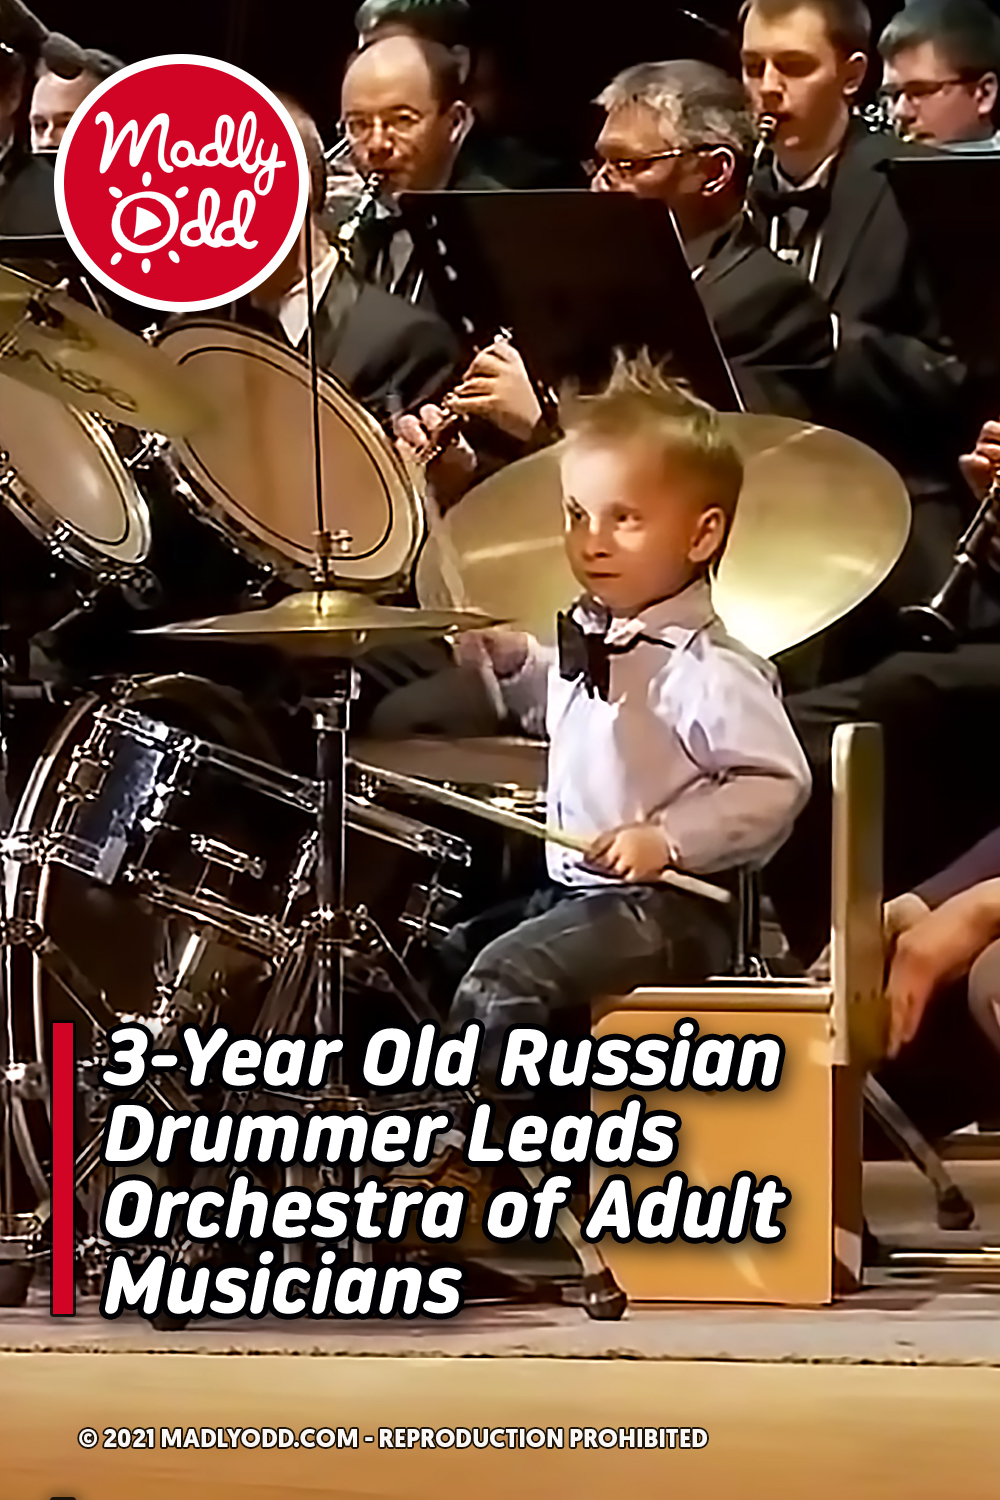 3-Year Old Russian Drummer Leads Orchestra of Adult Musicians